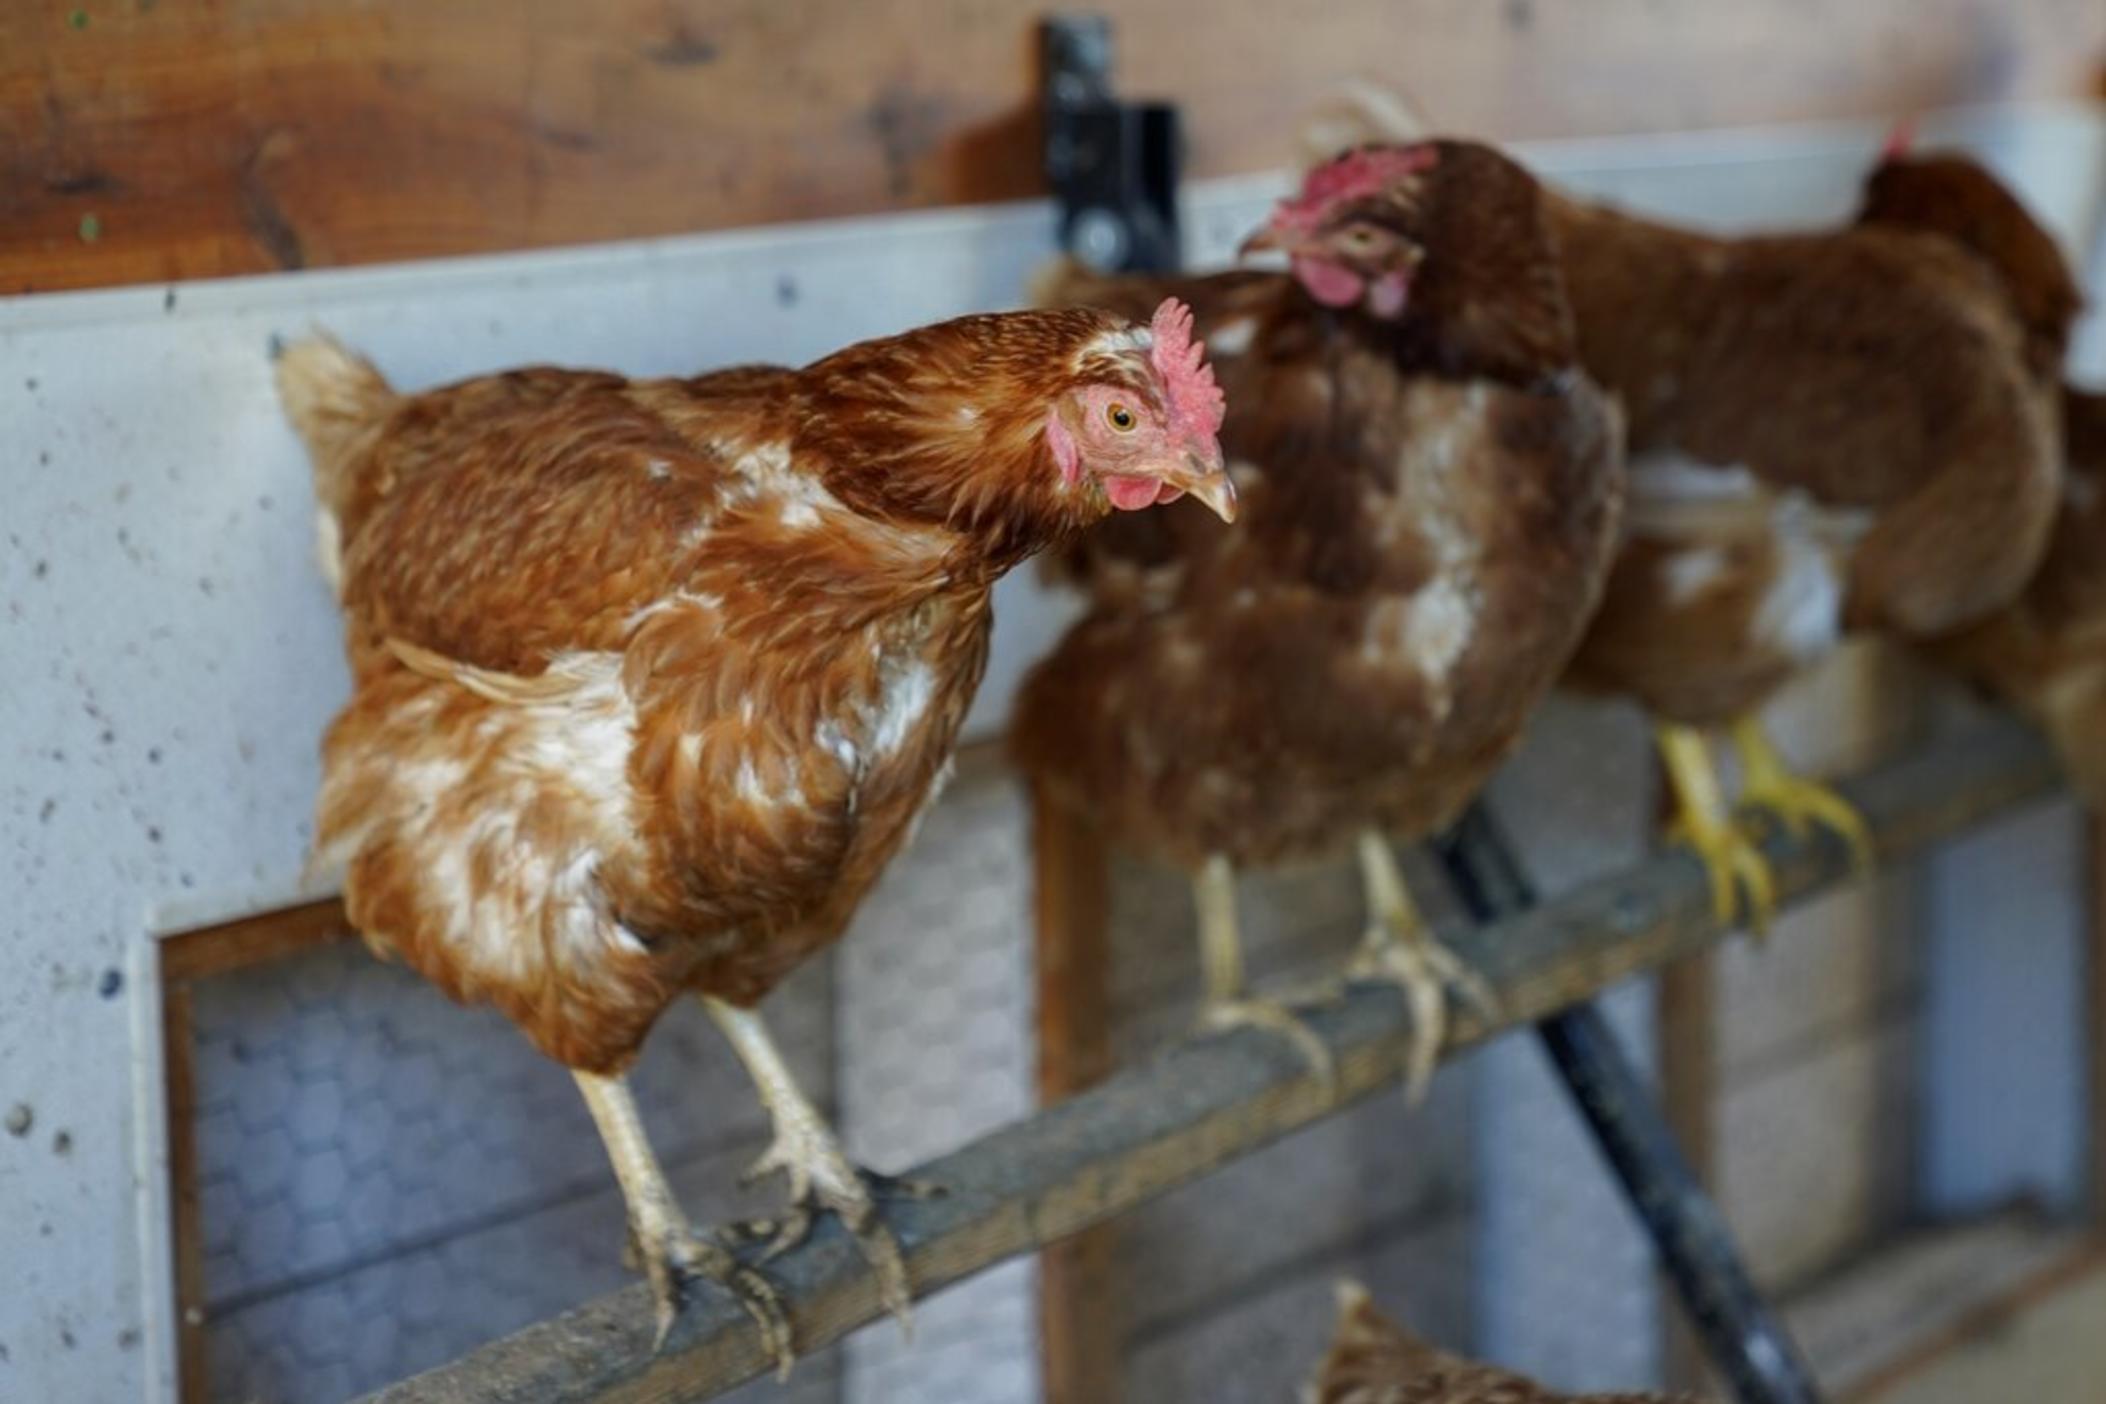 Red Star chickens roost in their coop, Jan. 10, 2023, at Historic Wagner Farm in Glenview, Ill. Amid soaring egg prices, social media users are claiming that common chicken feed products are preventing their own hens from laying eggs.